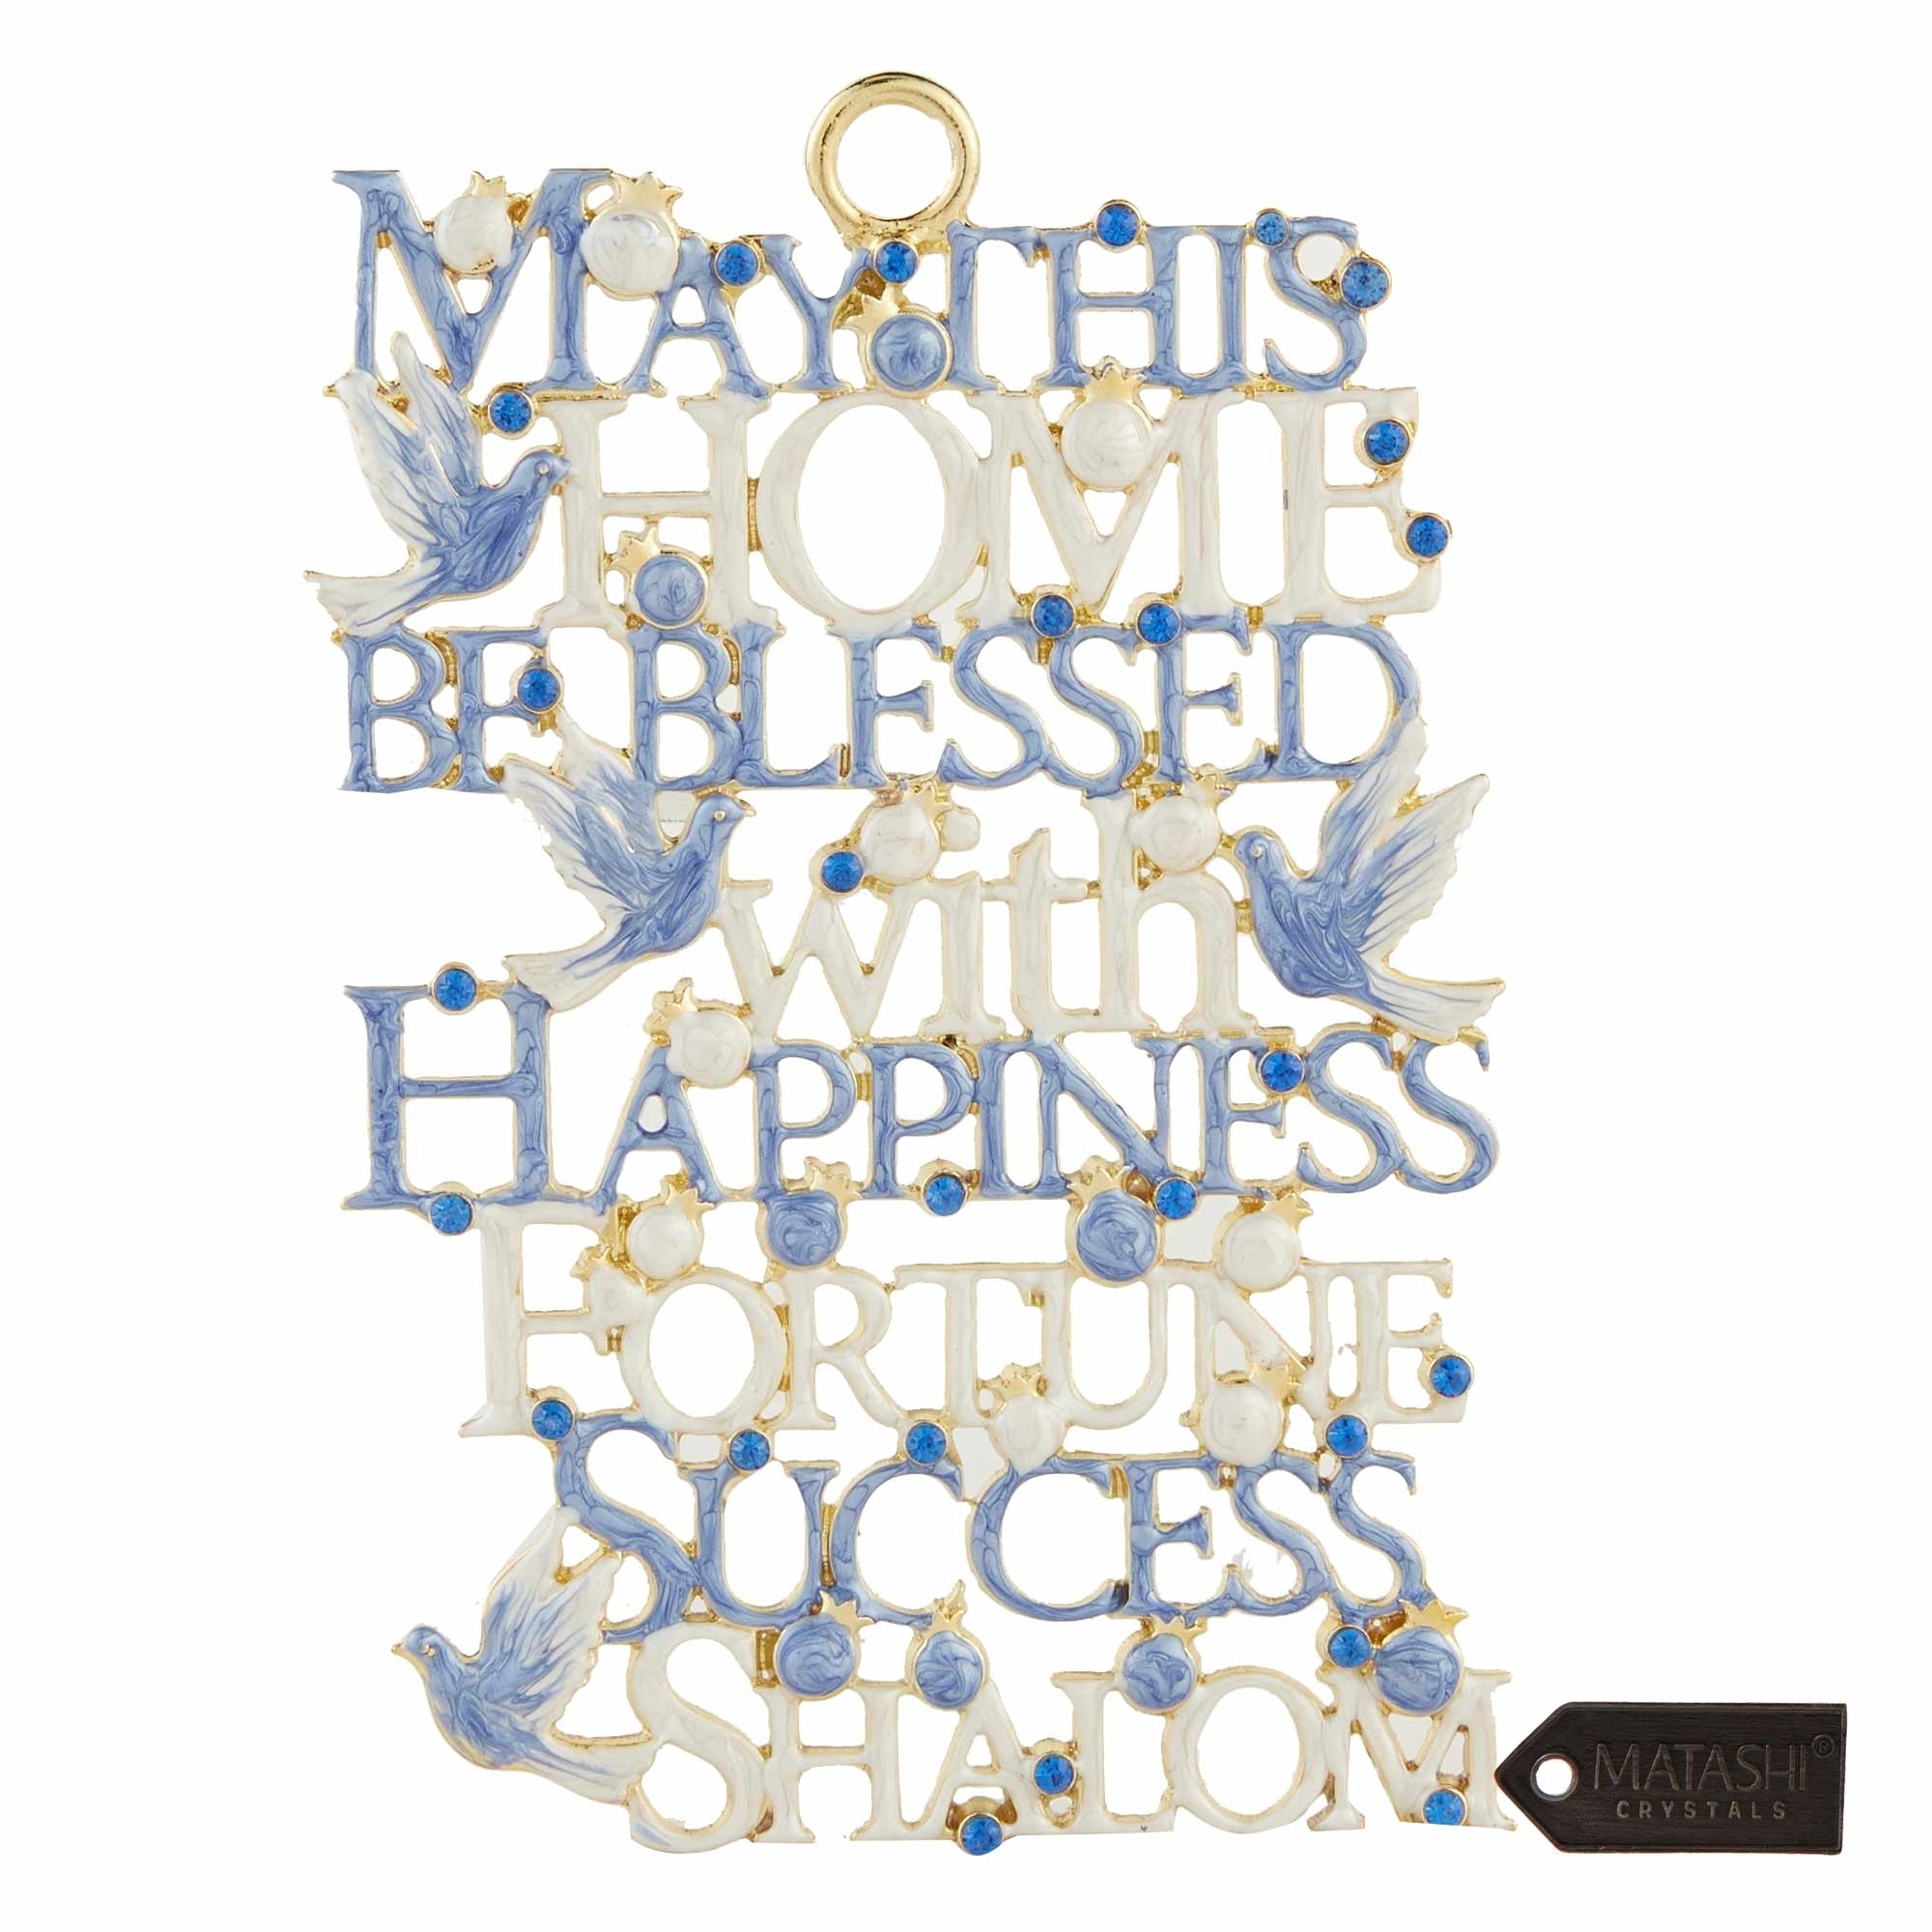 Matashi English Judaica Blessing For The Home Blue And Ivory Hanging Wall Ornament W/ Crystals & Dove Design (Pewter) Wall Decor For Home